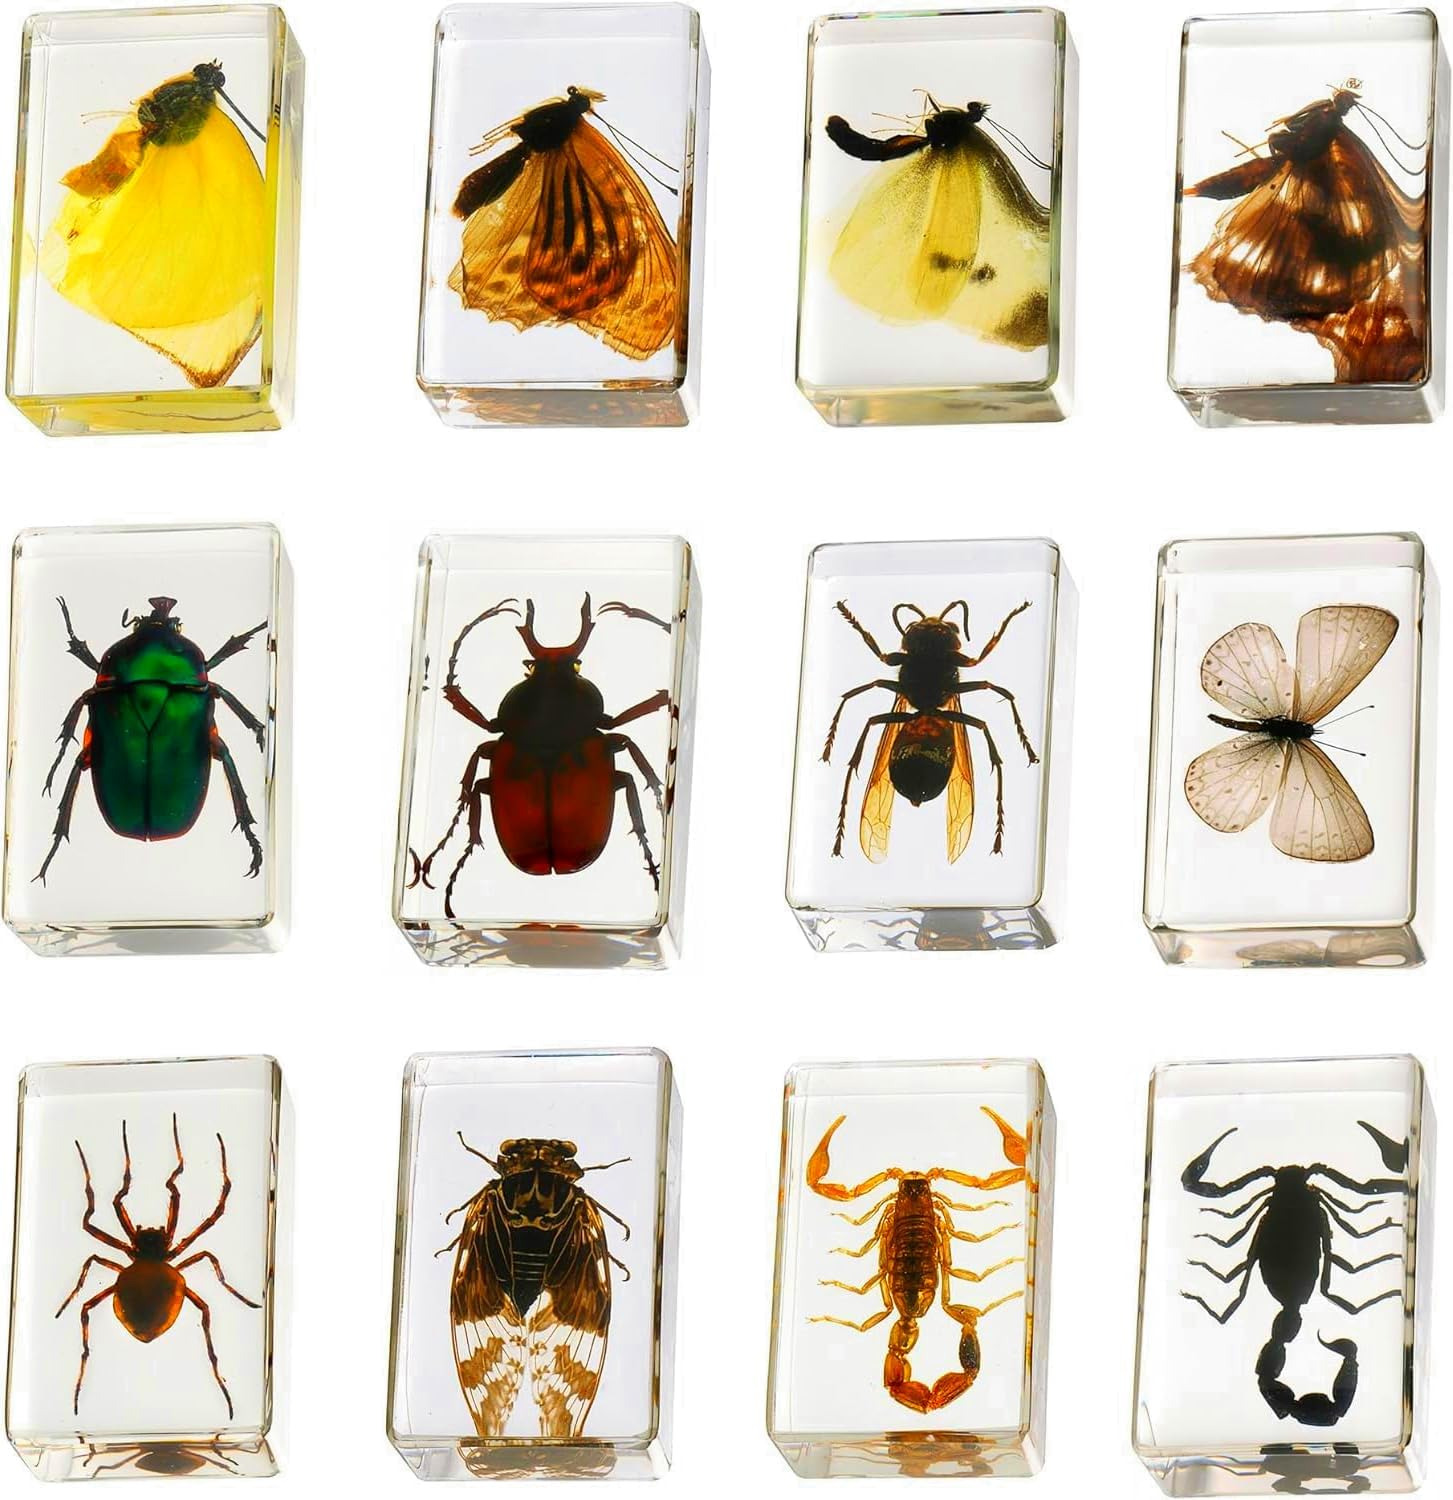 12 Pcs Insect in Resin Collection - Educational Bugs Specimen Set for Kids, Perf